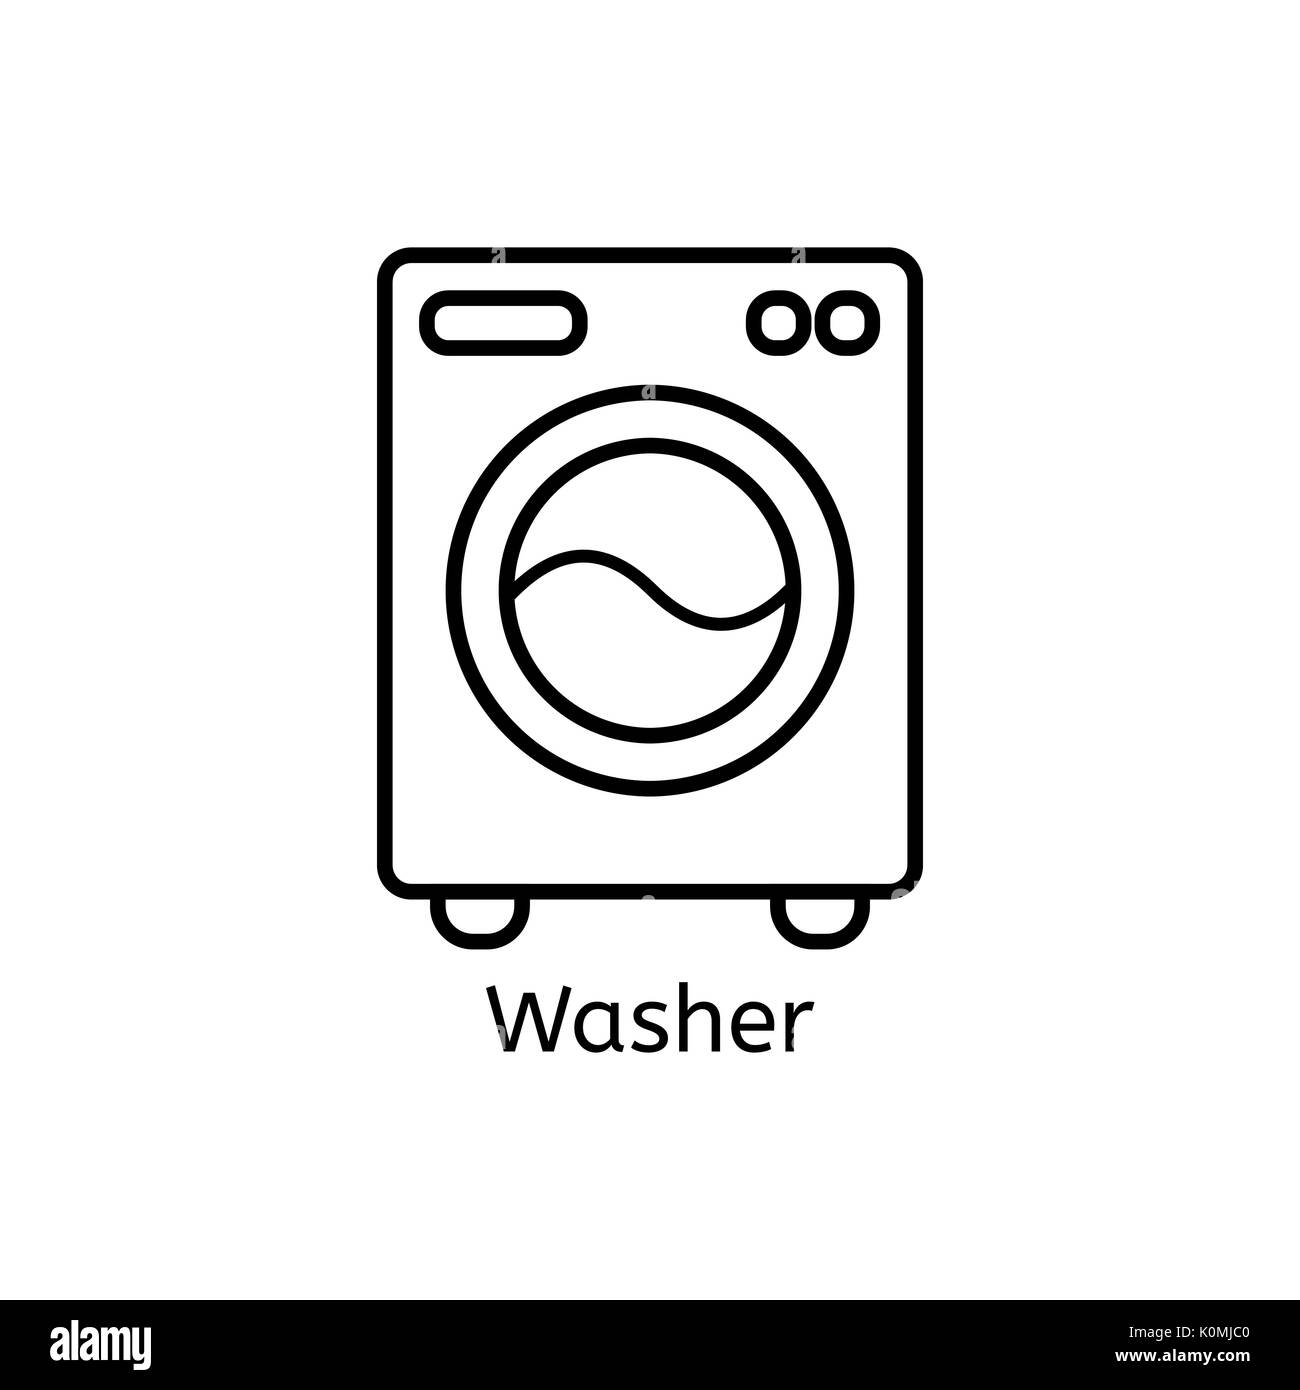 Detergents simple line icon. Liquid detergent thin linear signs. Means for cleaning simple concept for websites, infographic, mobile applications. Stock Vector